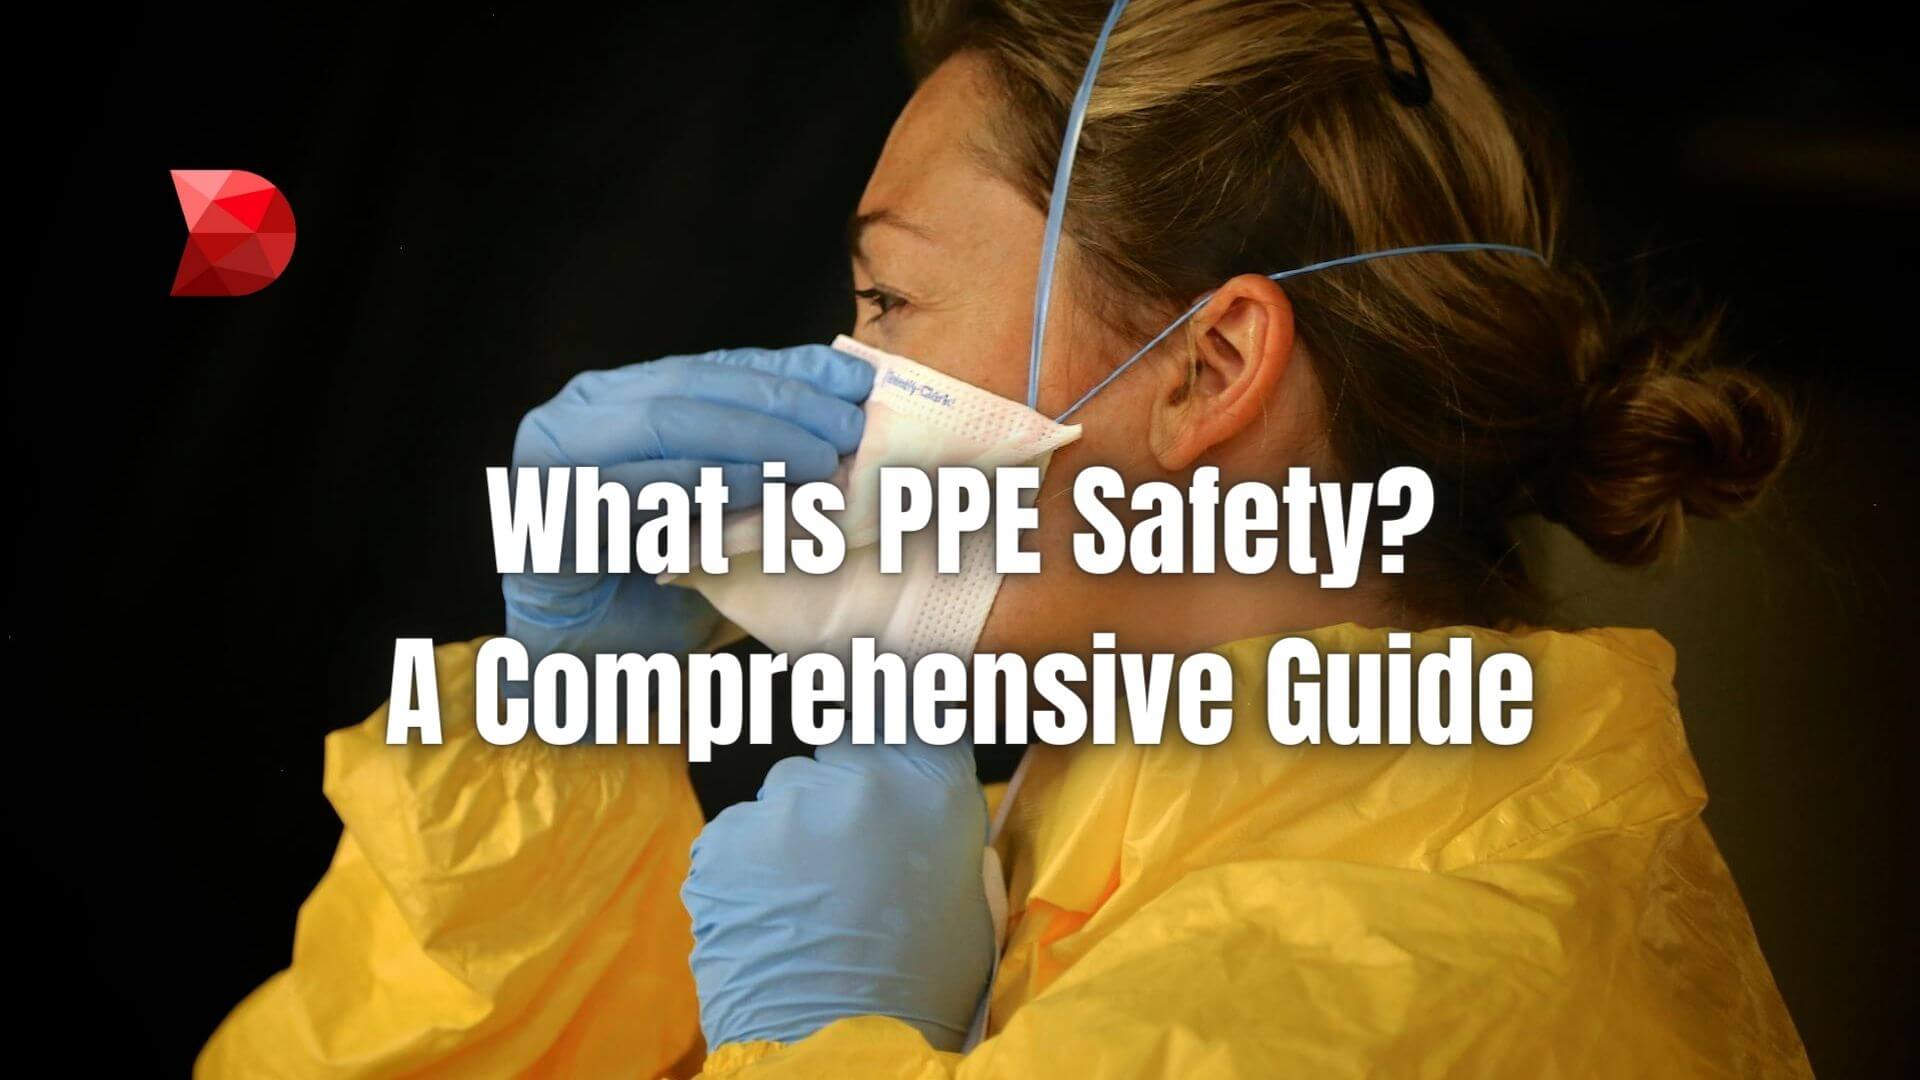 Unlock the essentials of PPE safety with our full guide. Click here to learn what PPE is, why it's crucial, and how to ensure compliance.